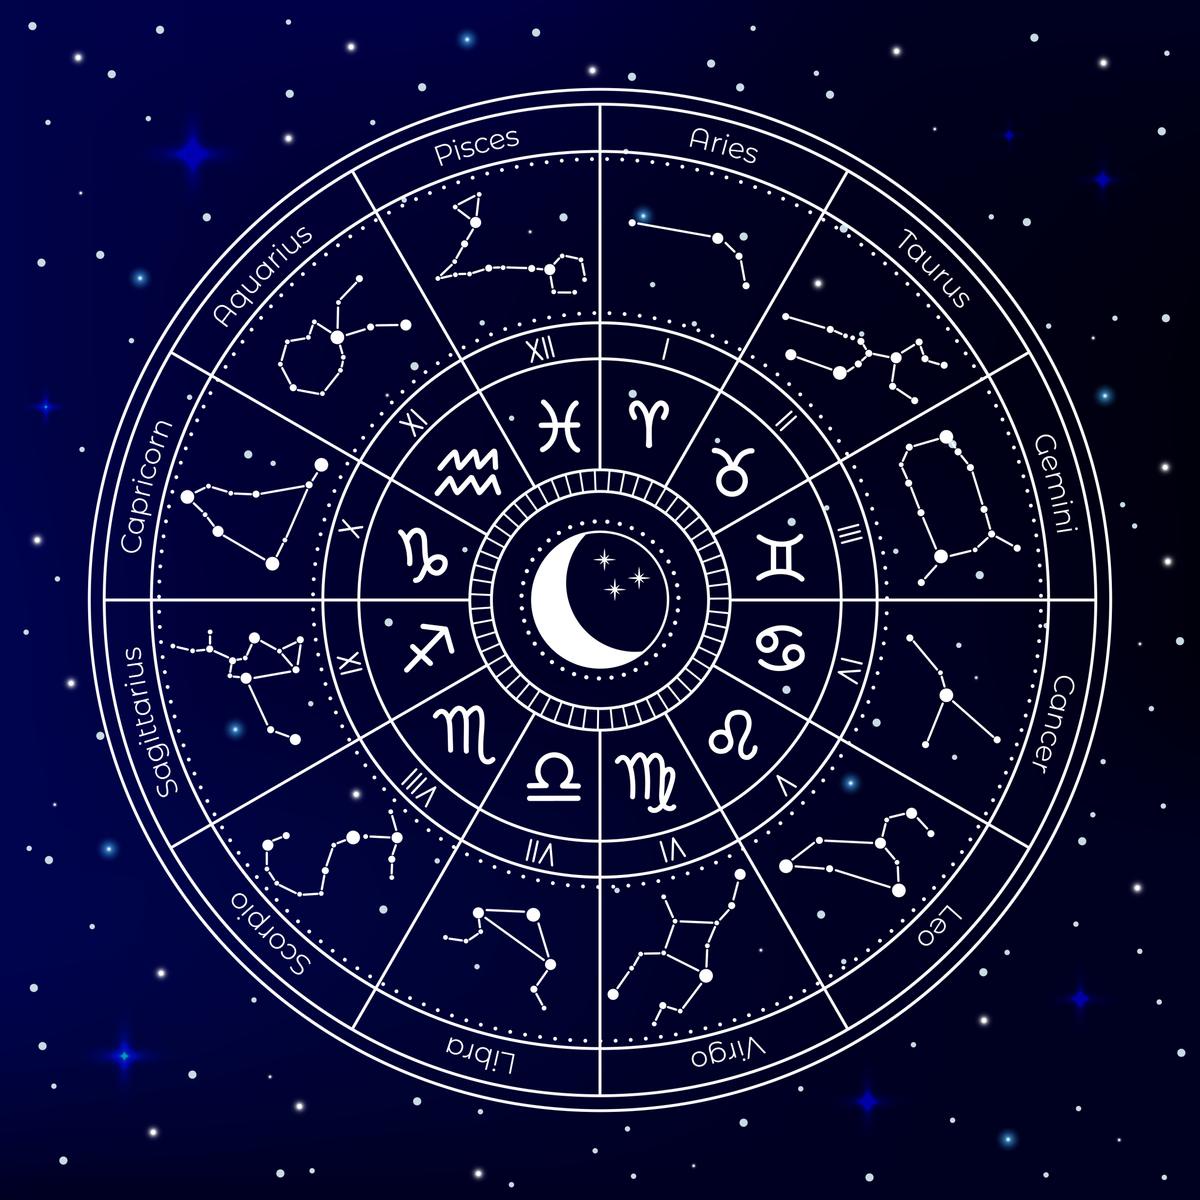 Top Astrologer in Gold Coast Reveals the Secret Meaning of Number 8 in Astrology